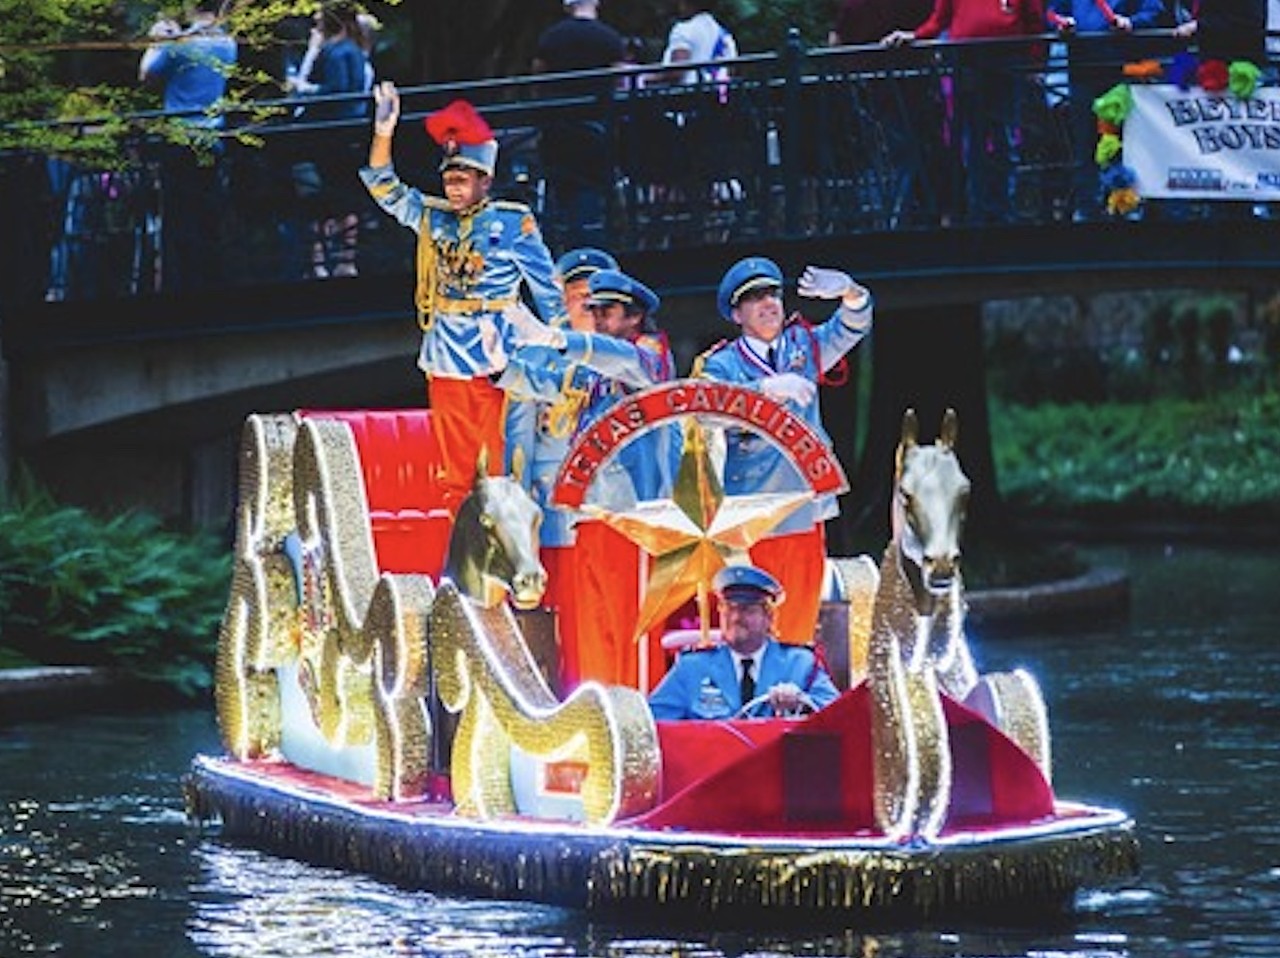 Use the river as a urinal during the Texas Cavaliers River Parade because the port-a-potty lines are too long.